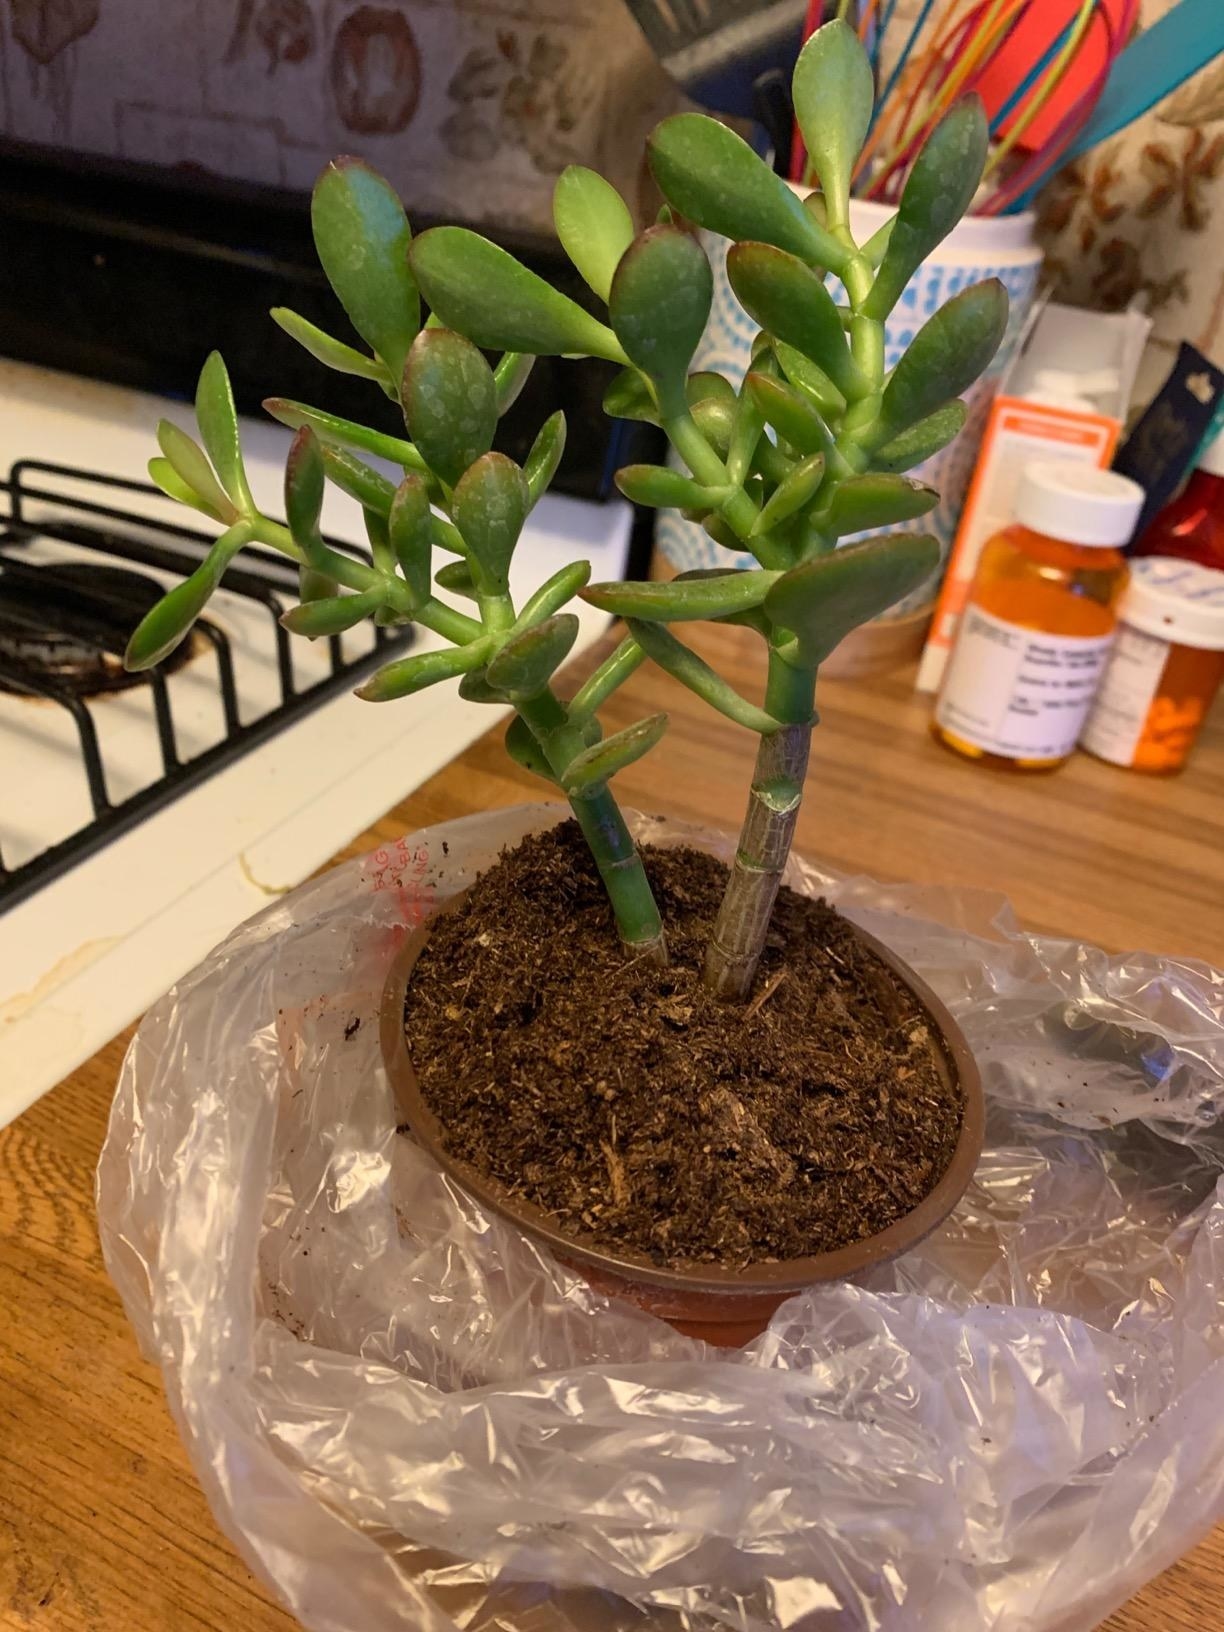 A reviewer showing the jade plant in a pot. The plant has small rubbery-looking leaves